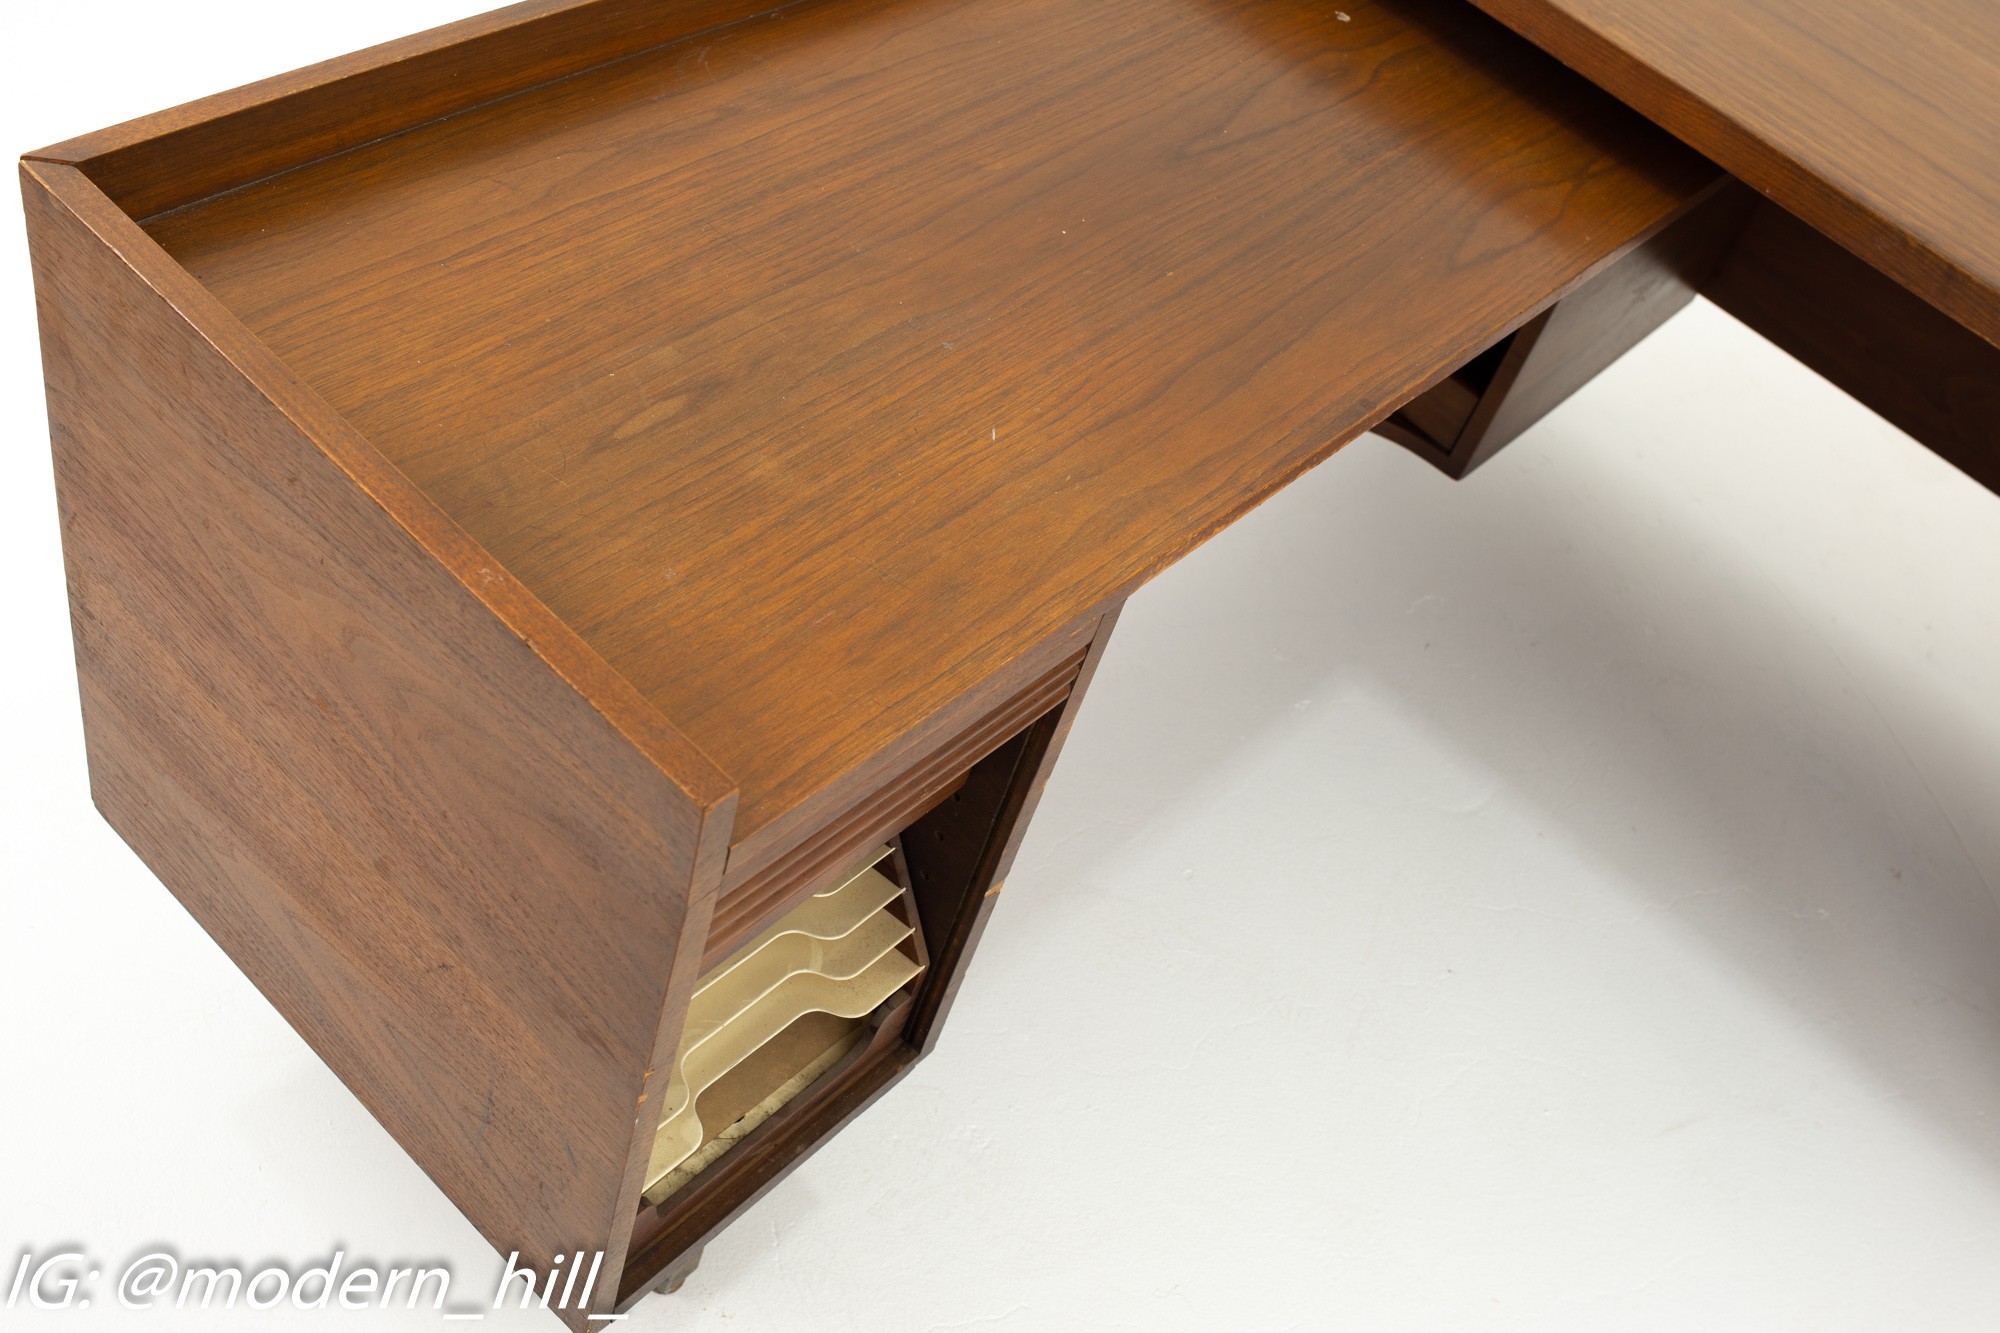 George Nelson for Herman Miller Style Mid Century Walnut and Chrome Executive Corner Desk